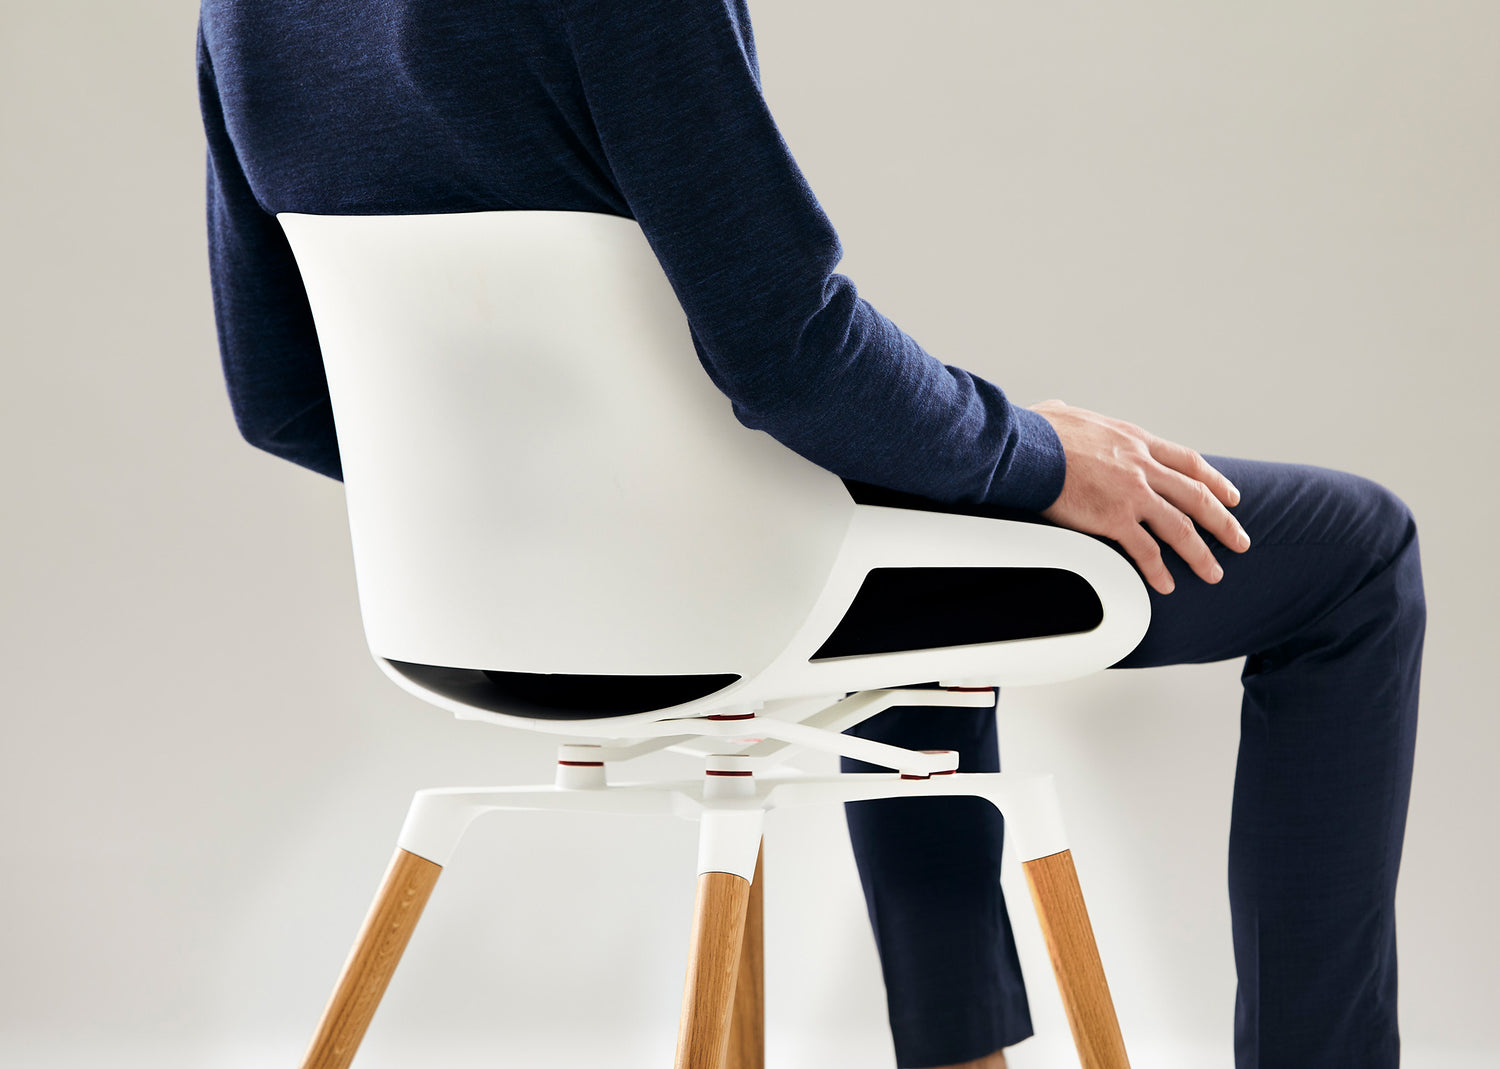 Aeris Numo Task Seat shell in white with wooden legs